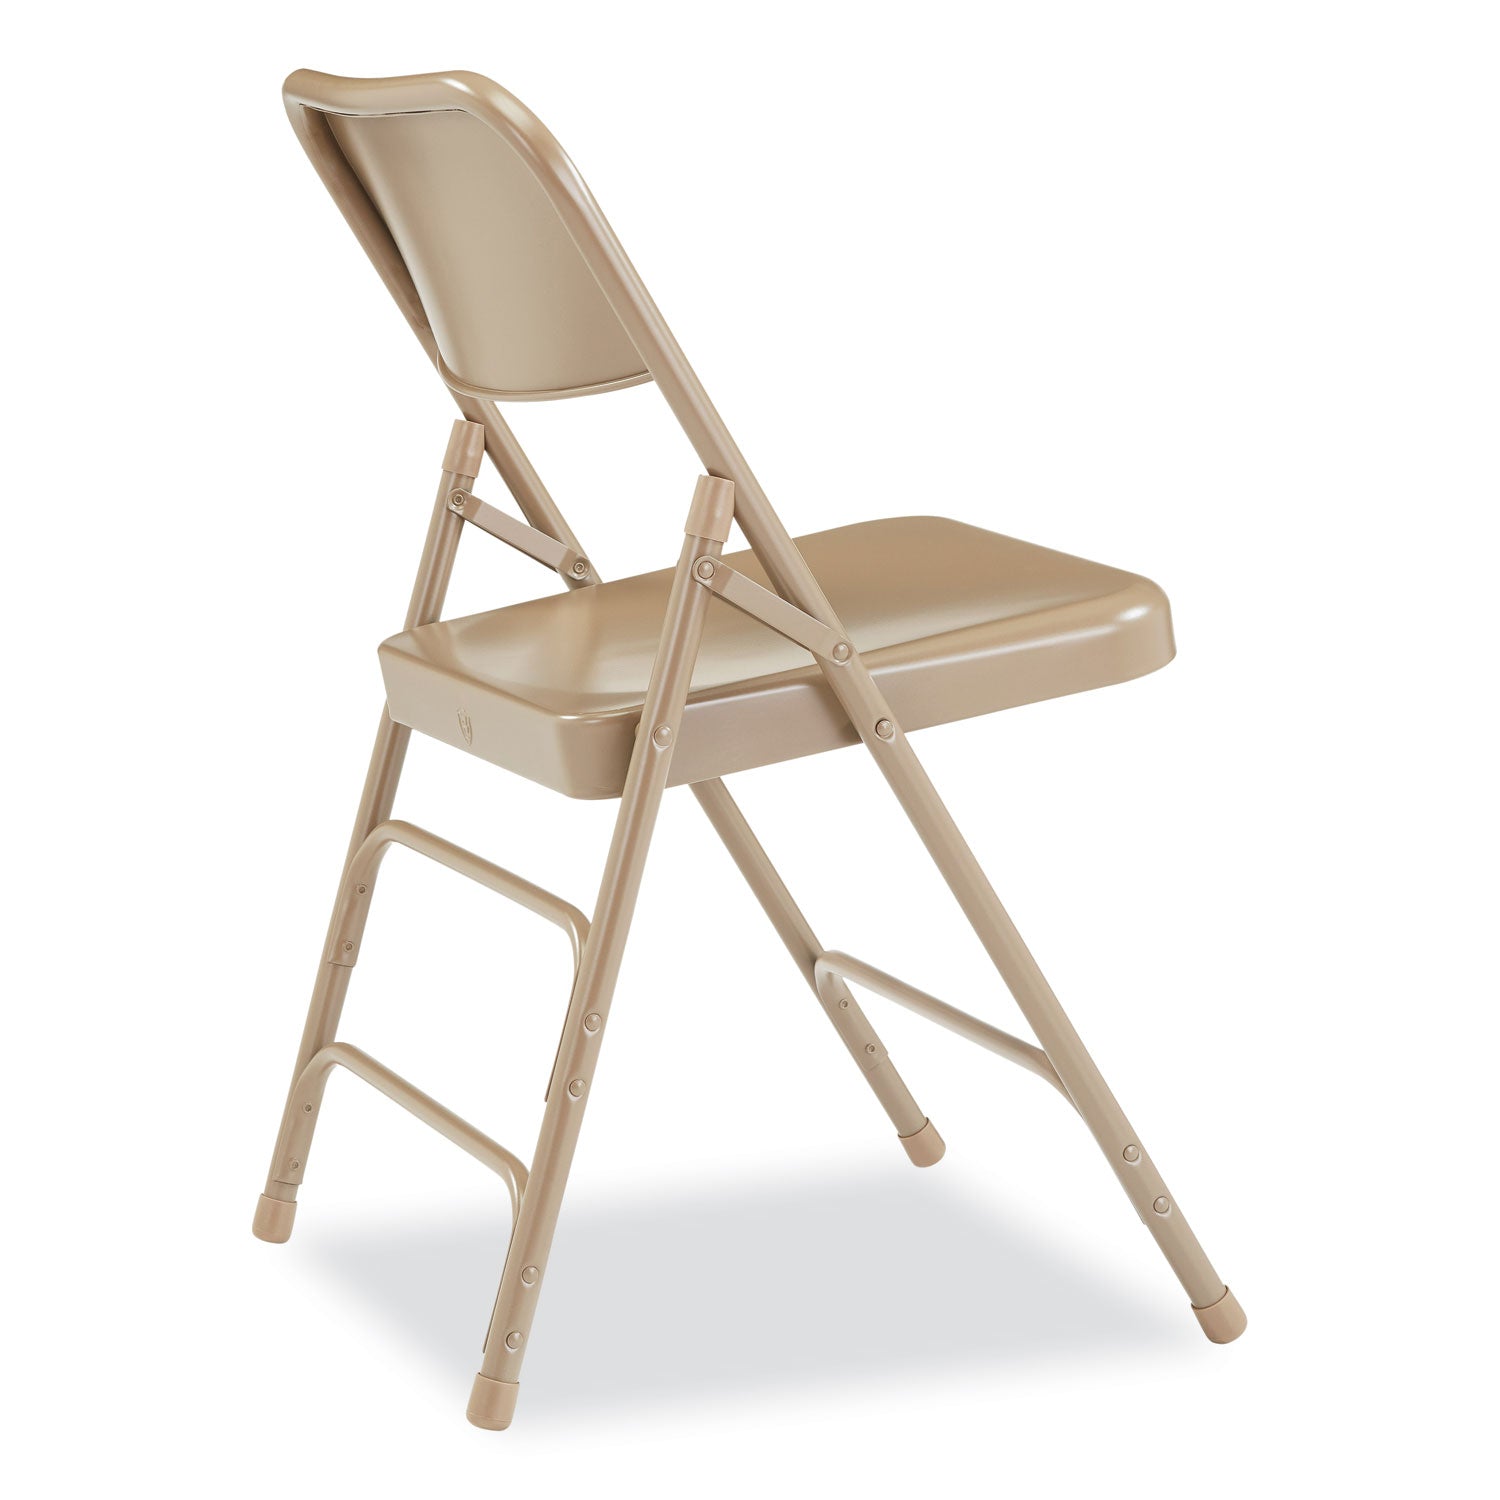 300-series-deluxe-all-steel-triple-brace-folding-chair-supports-480-lb-1725-seat-ht-beige-4-ct-ships-in-1-3-bus-days_nps301 - 4